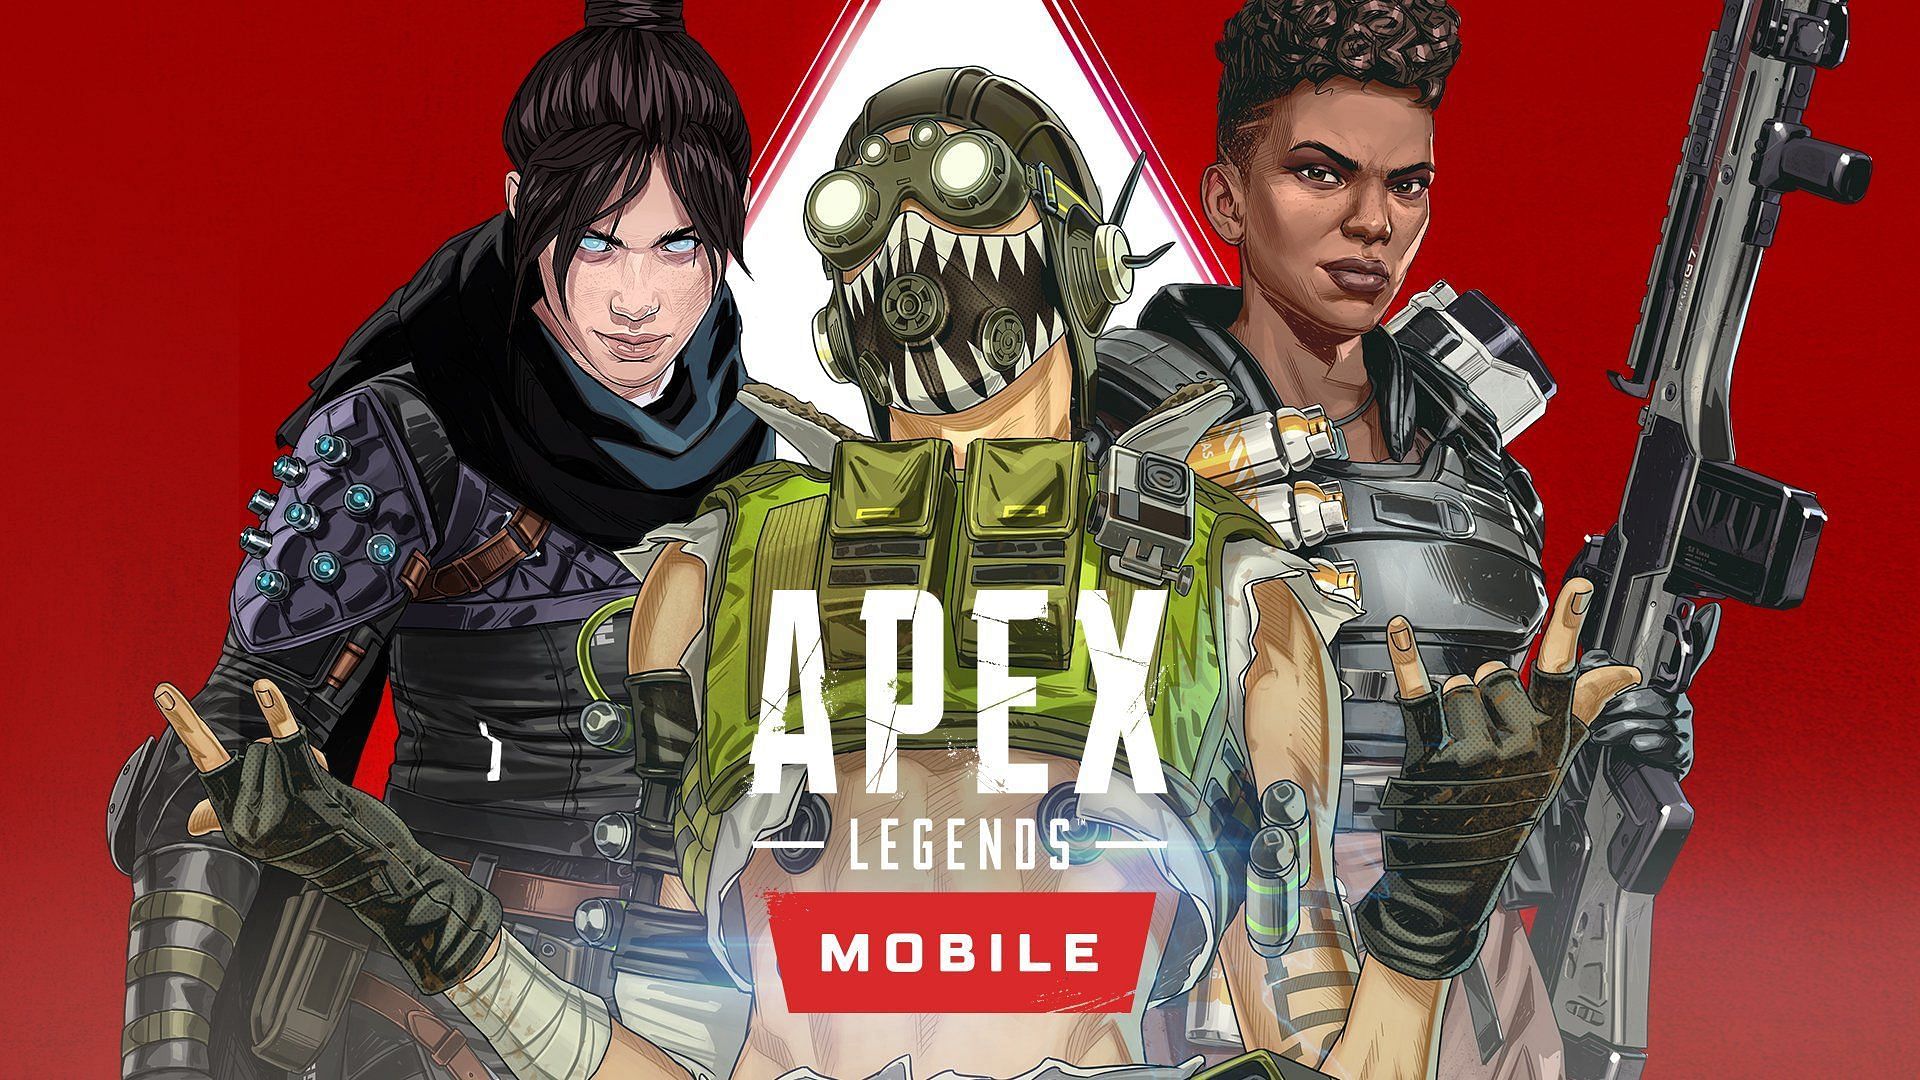 Official imagery for Apex Legends Mobile (Image via Respawn)